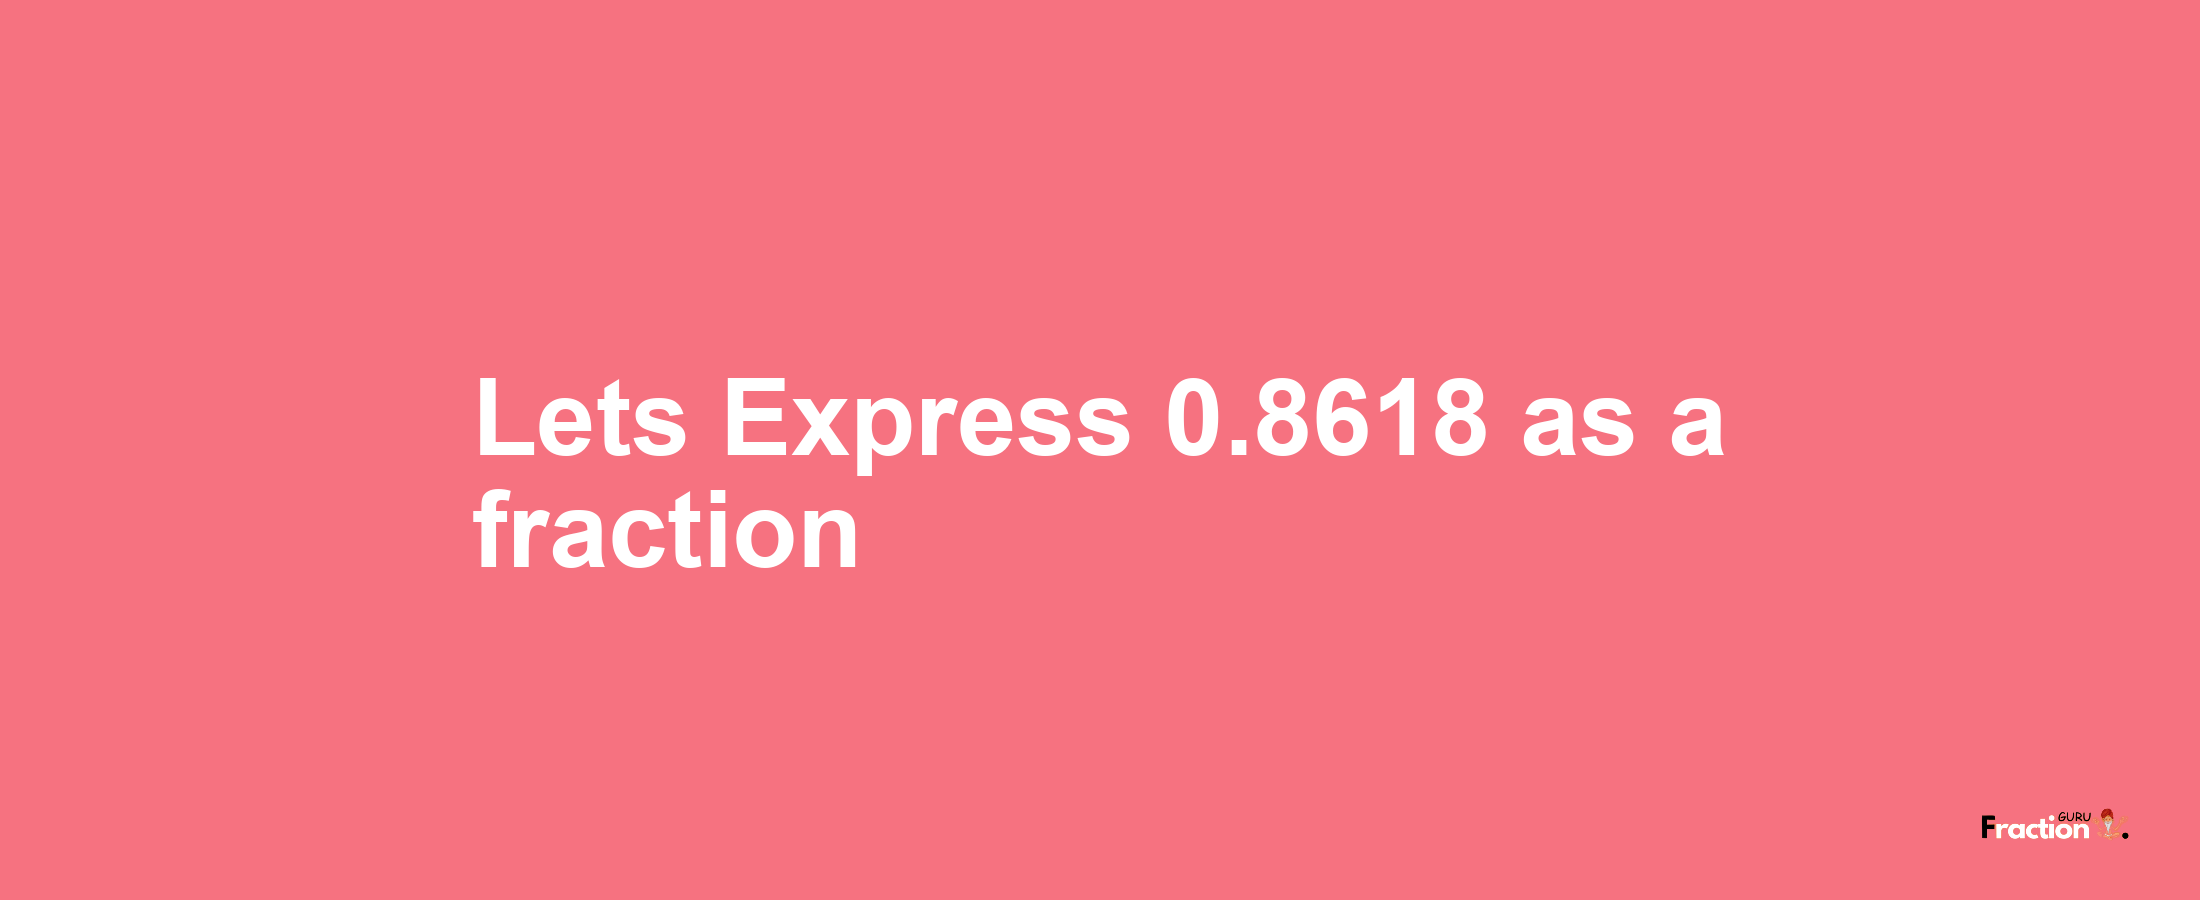 Lets Express 0.8618 as afraction